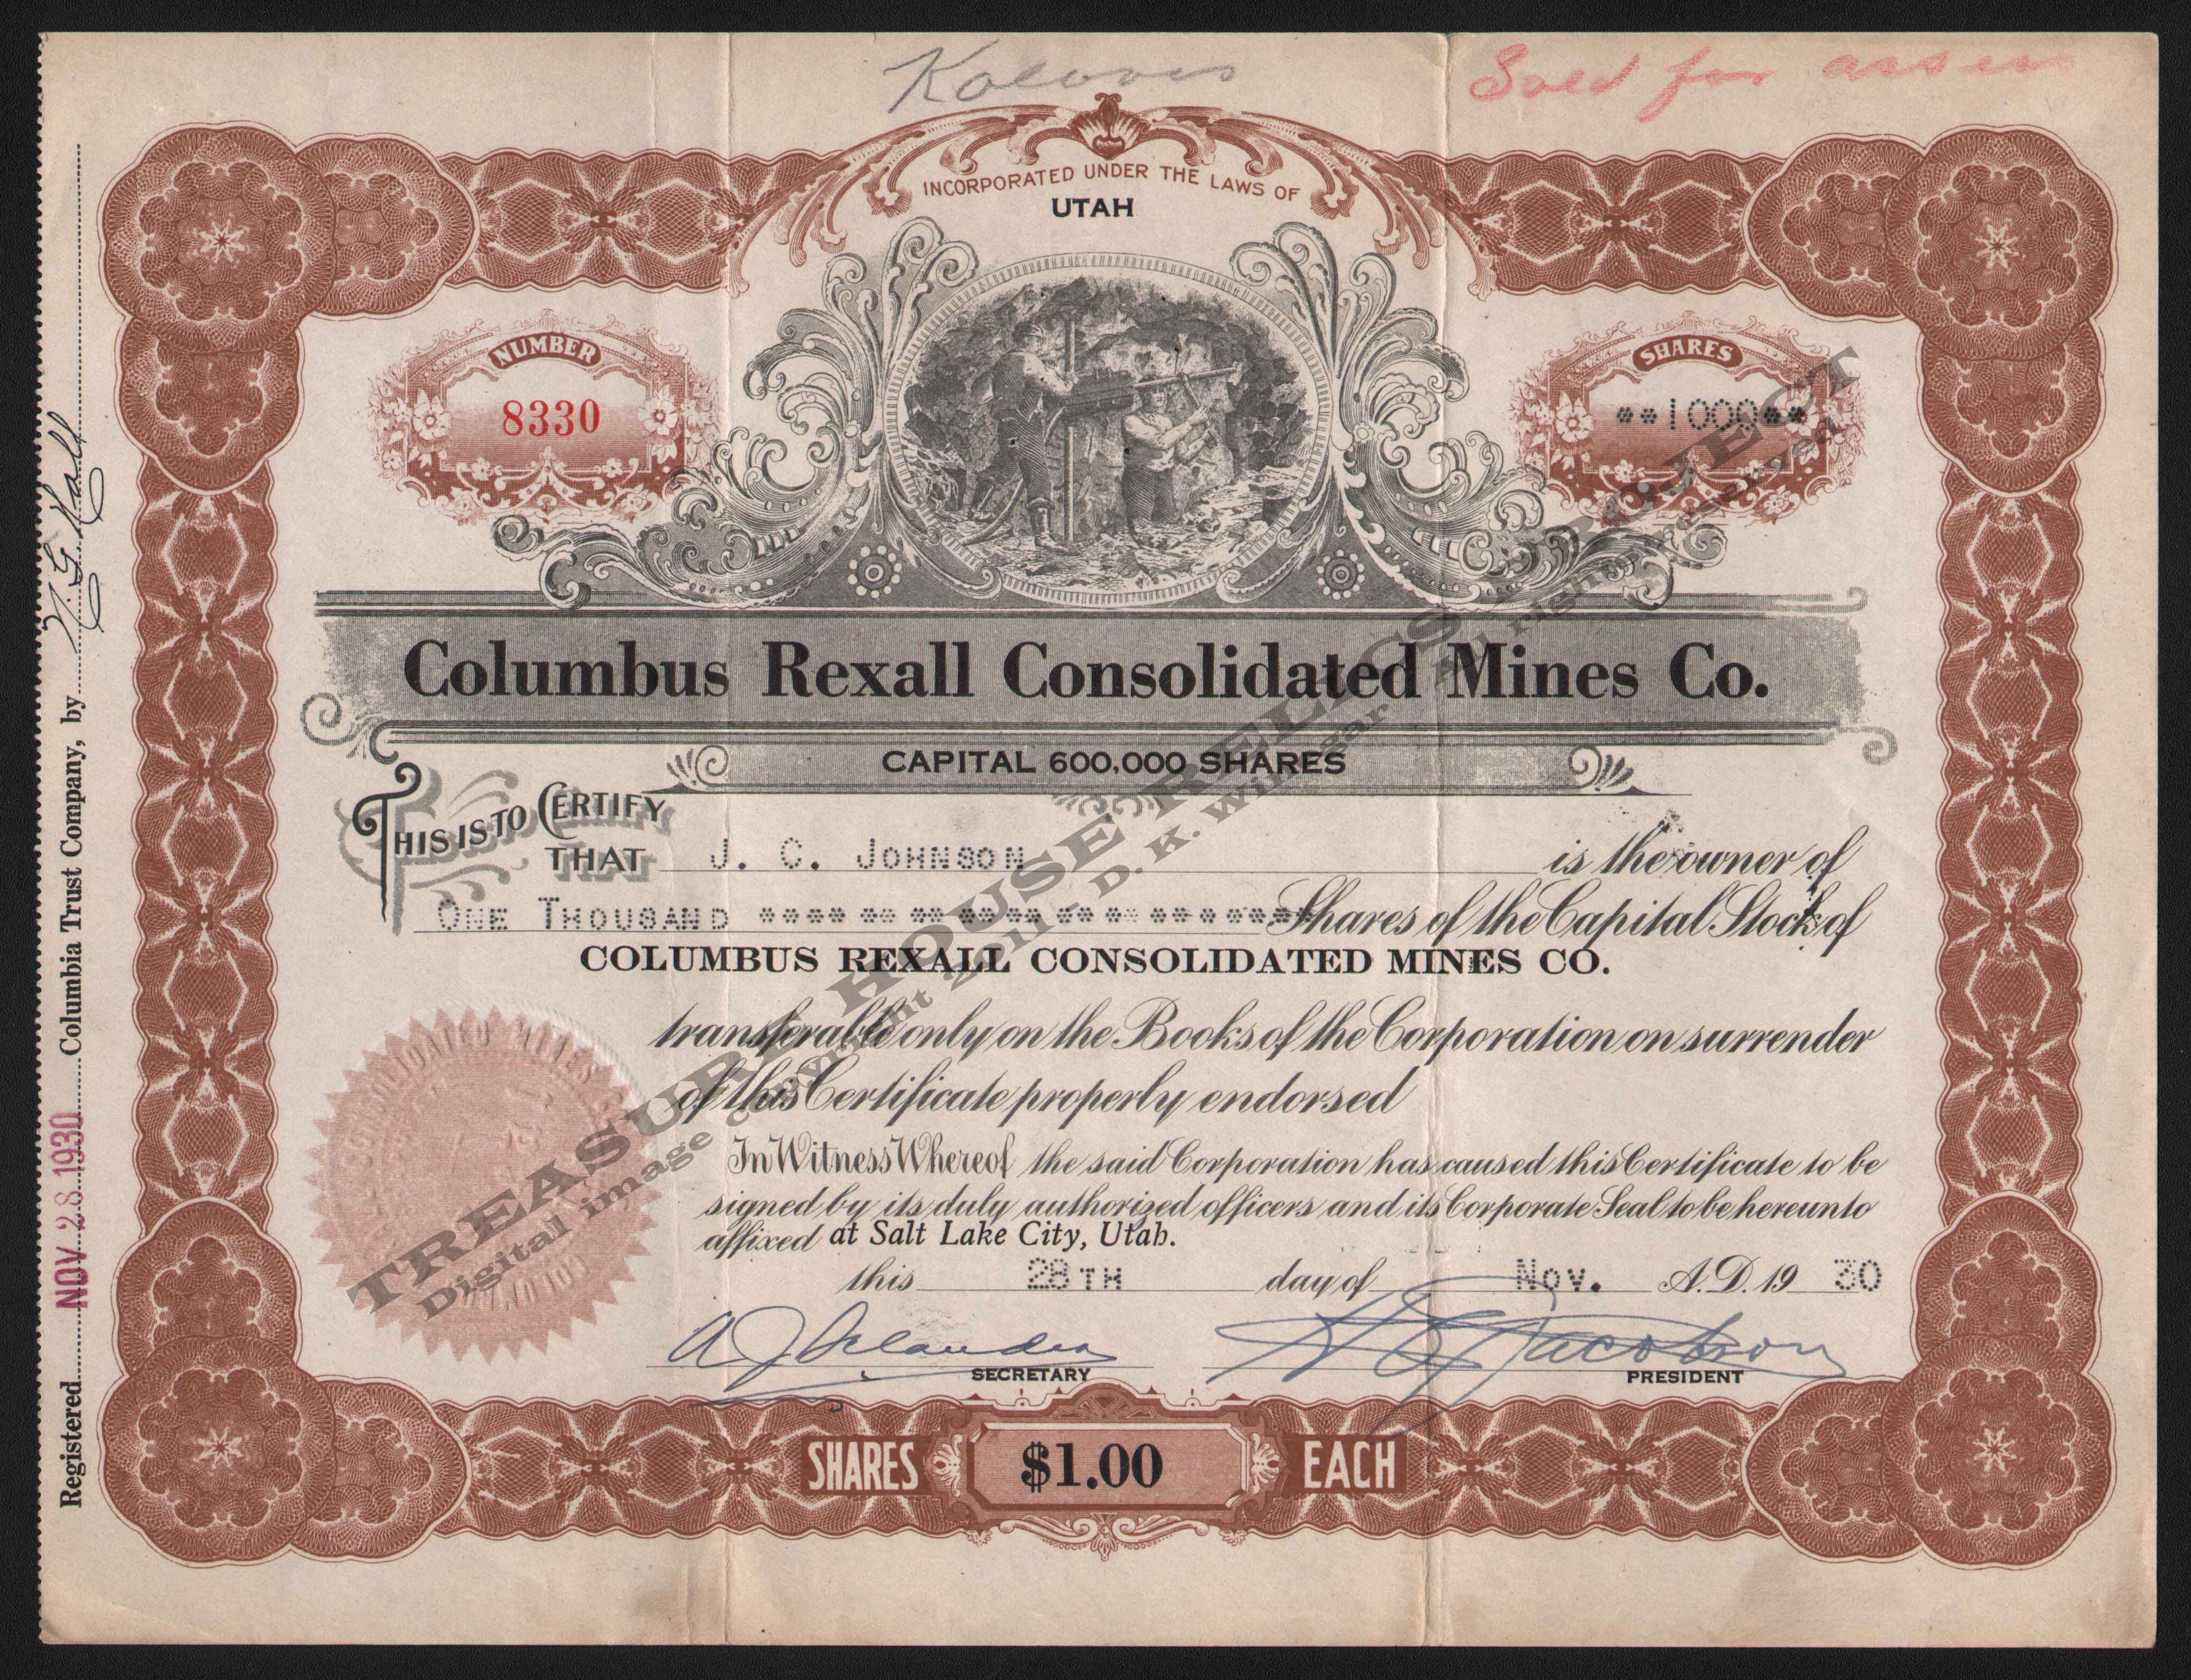 COLUMBUS_REXALL_CONSOLIDATED_MINES_COMPANY_8330_1930_400_EMBOSS.jpg